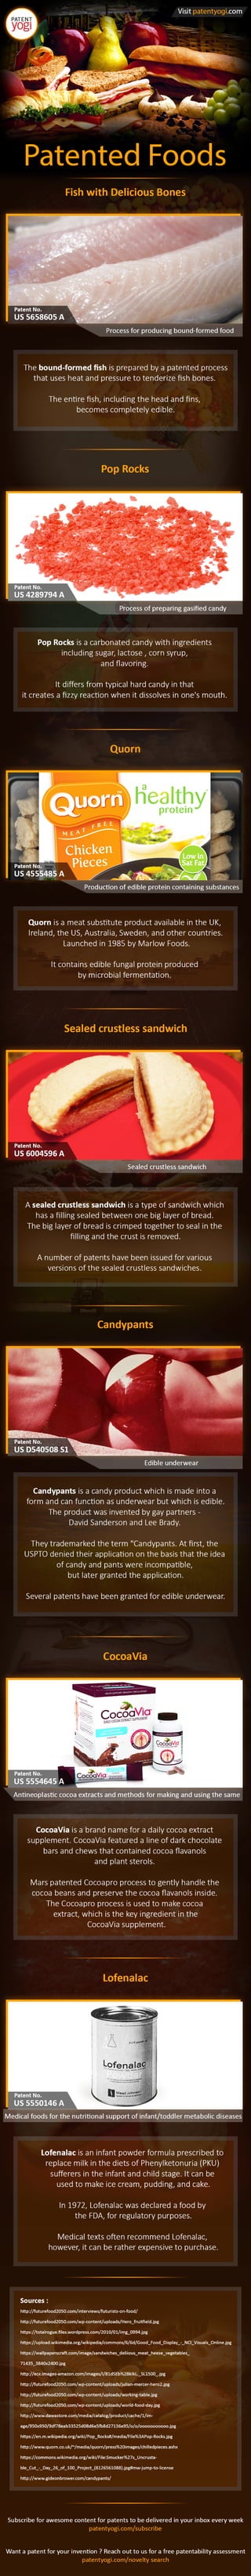  Top 7 Patented Foods